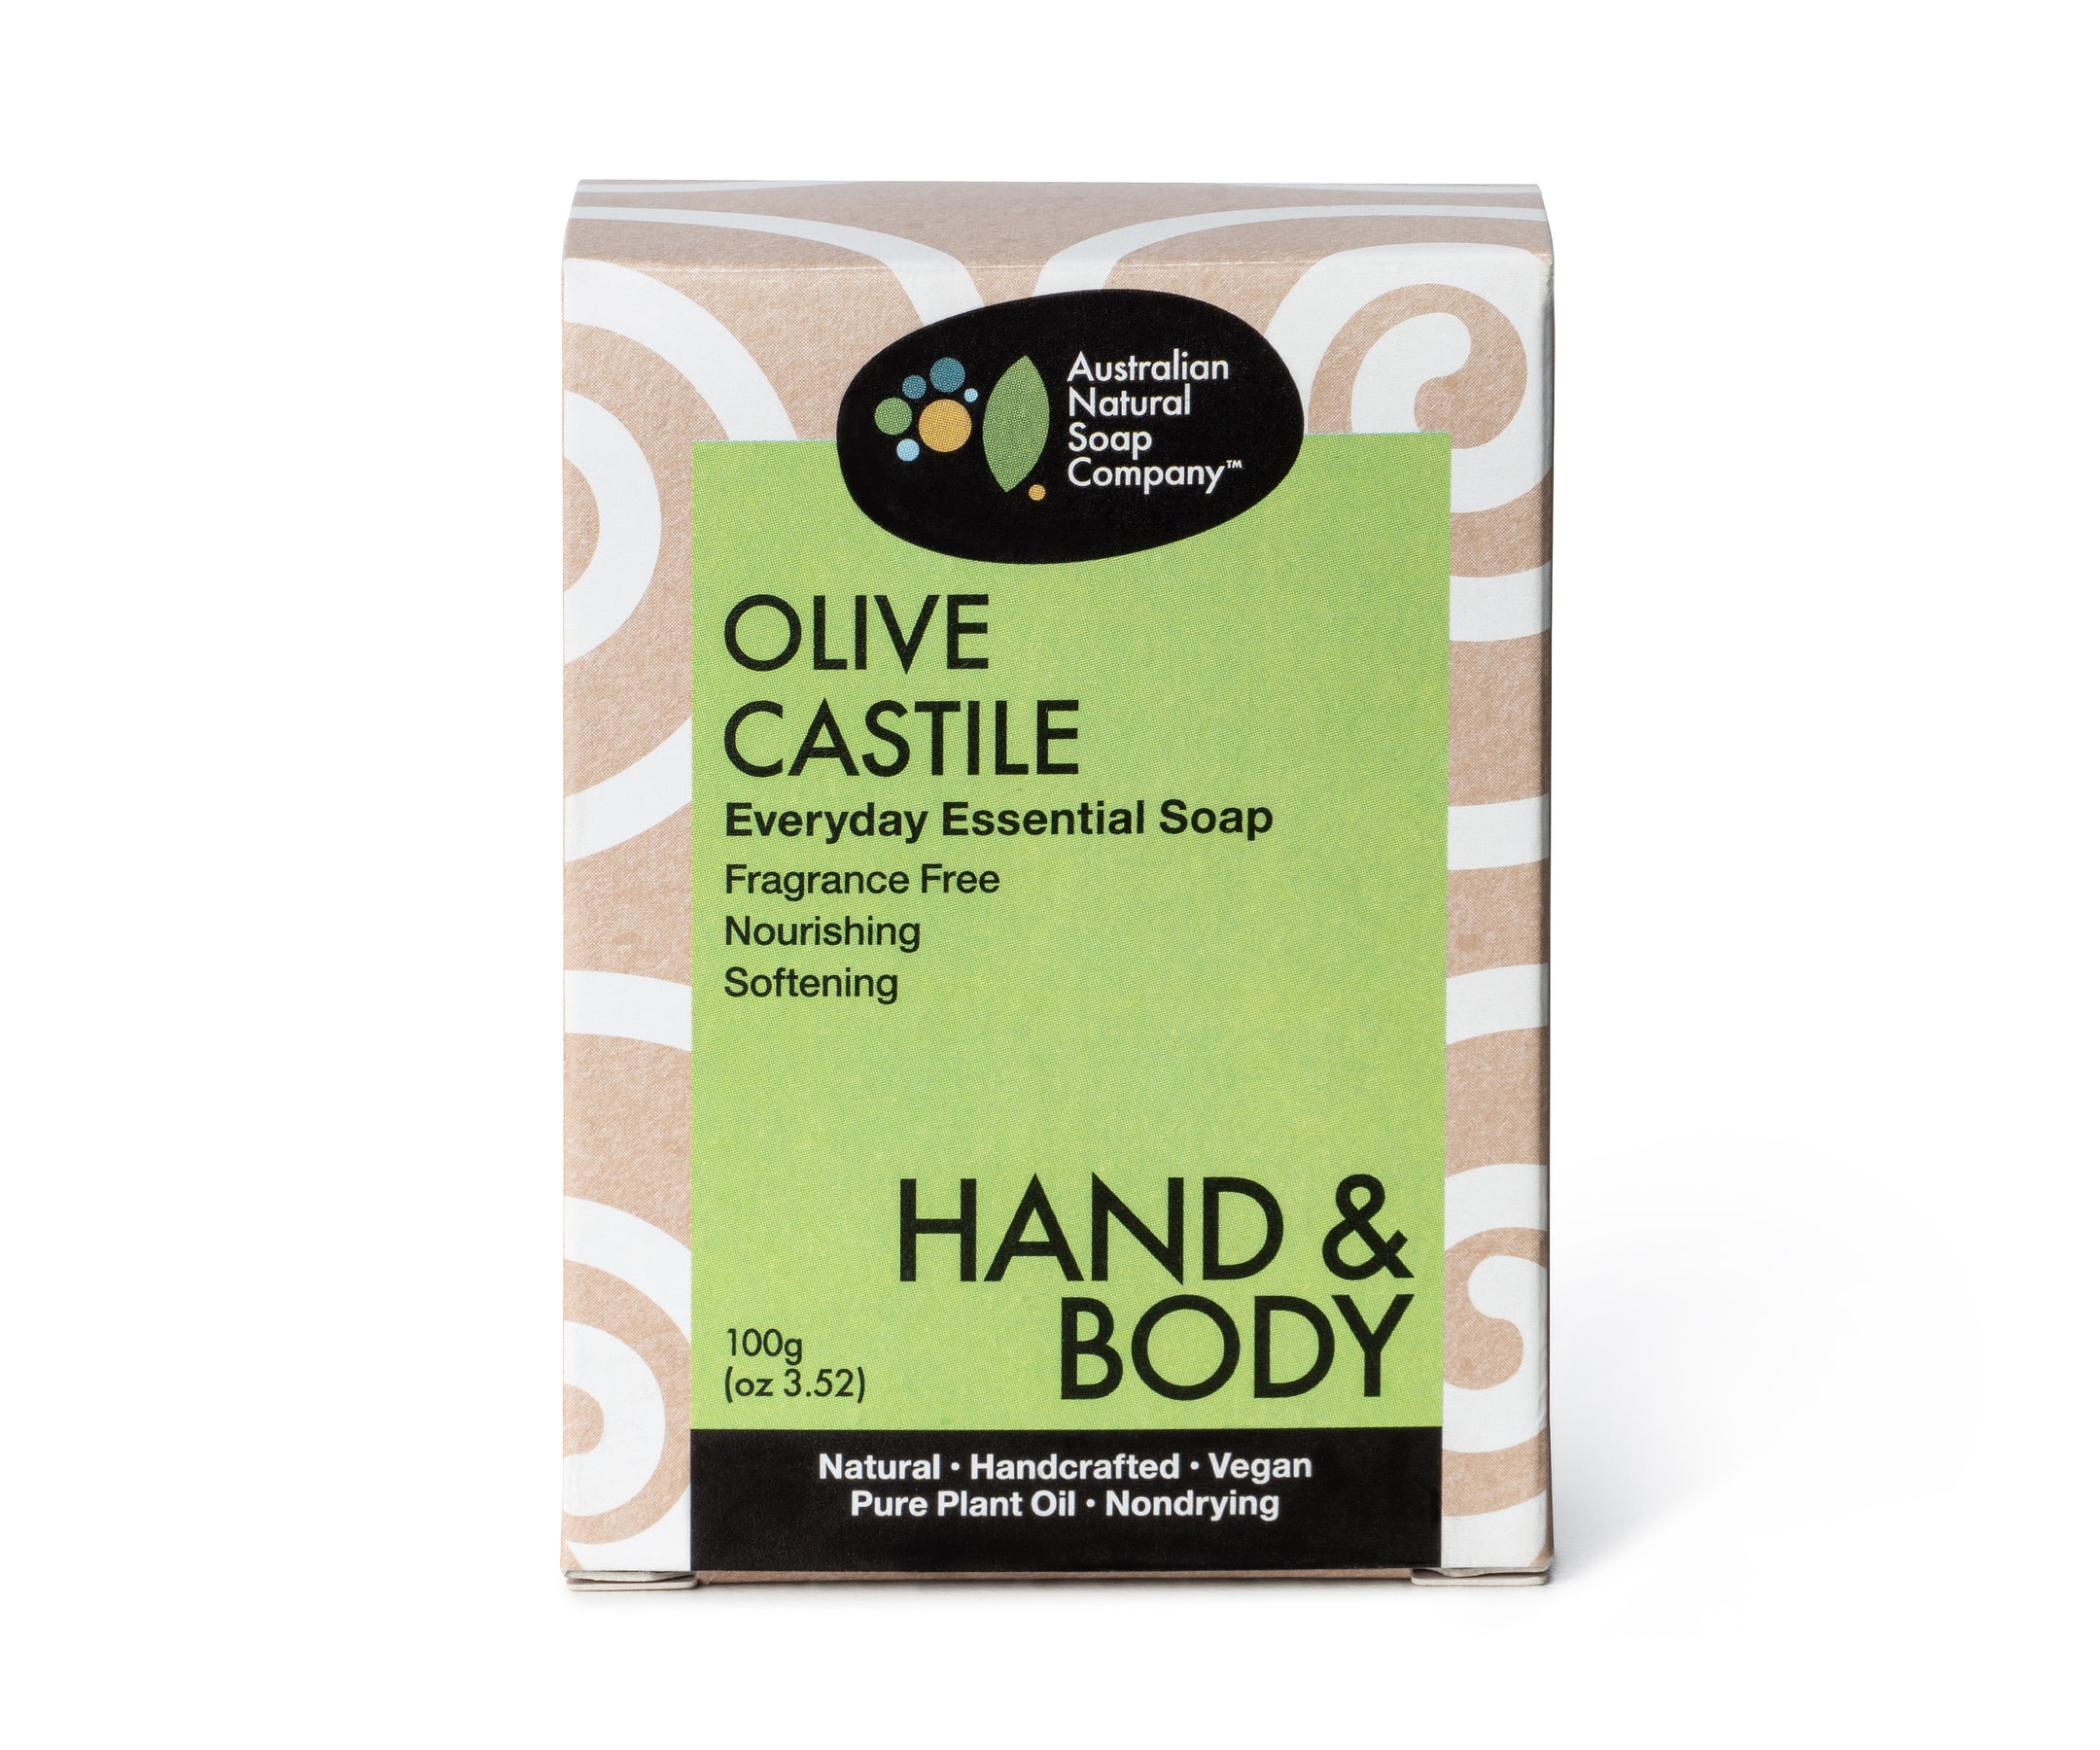 Australian Natural Soap Company handcrafted olive castile hand body bar front of box